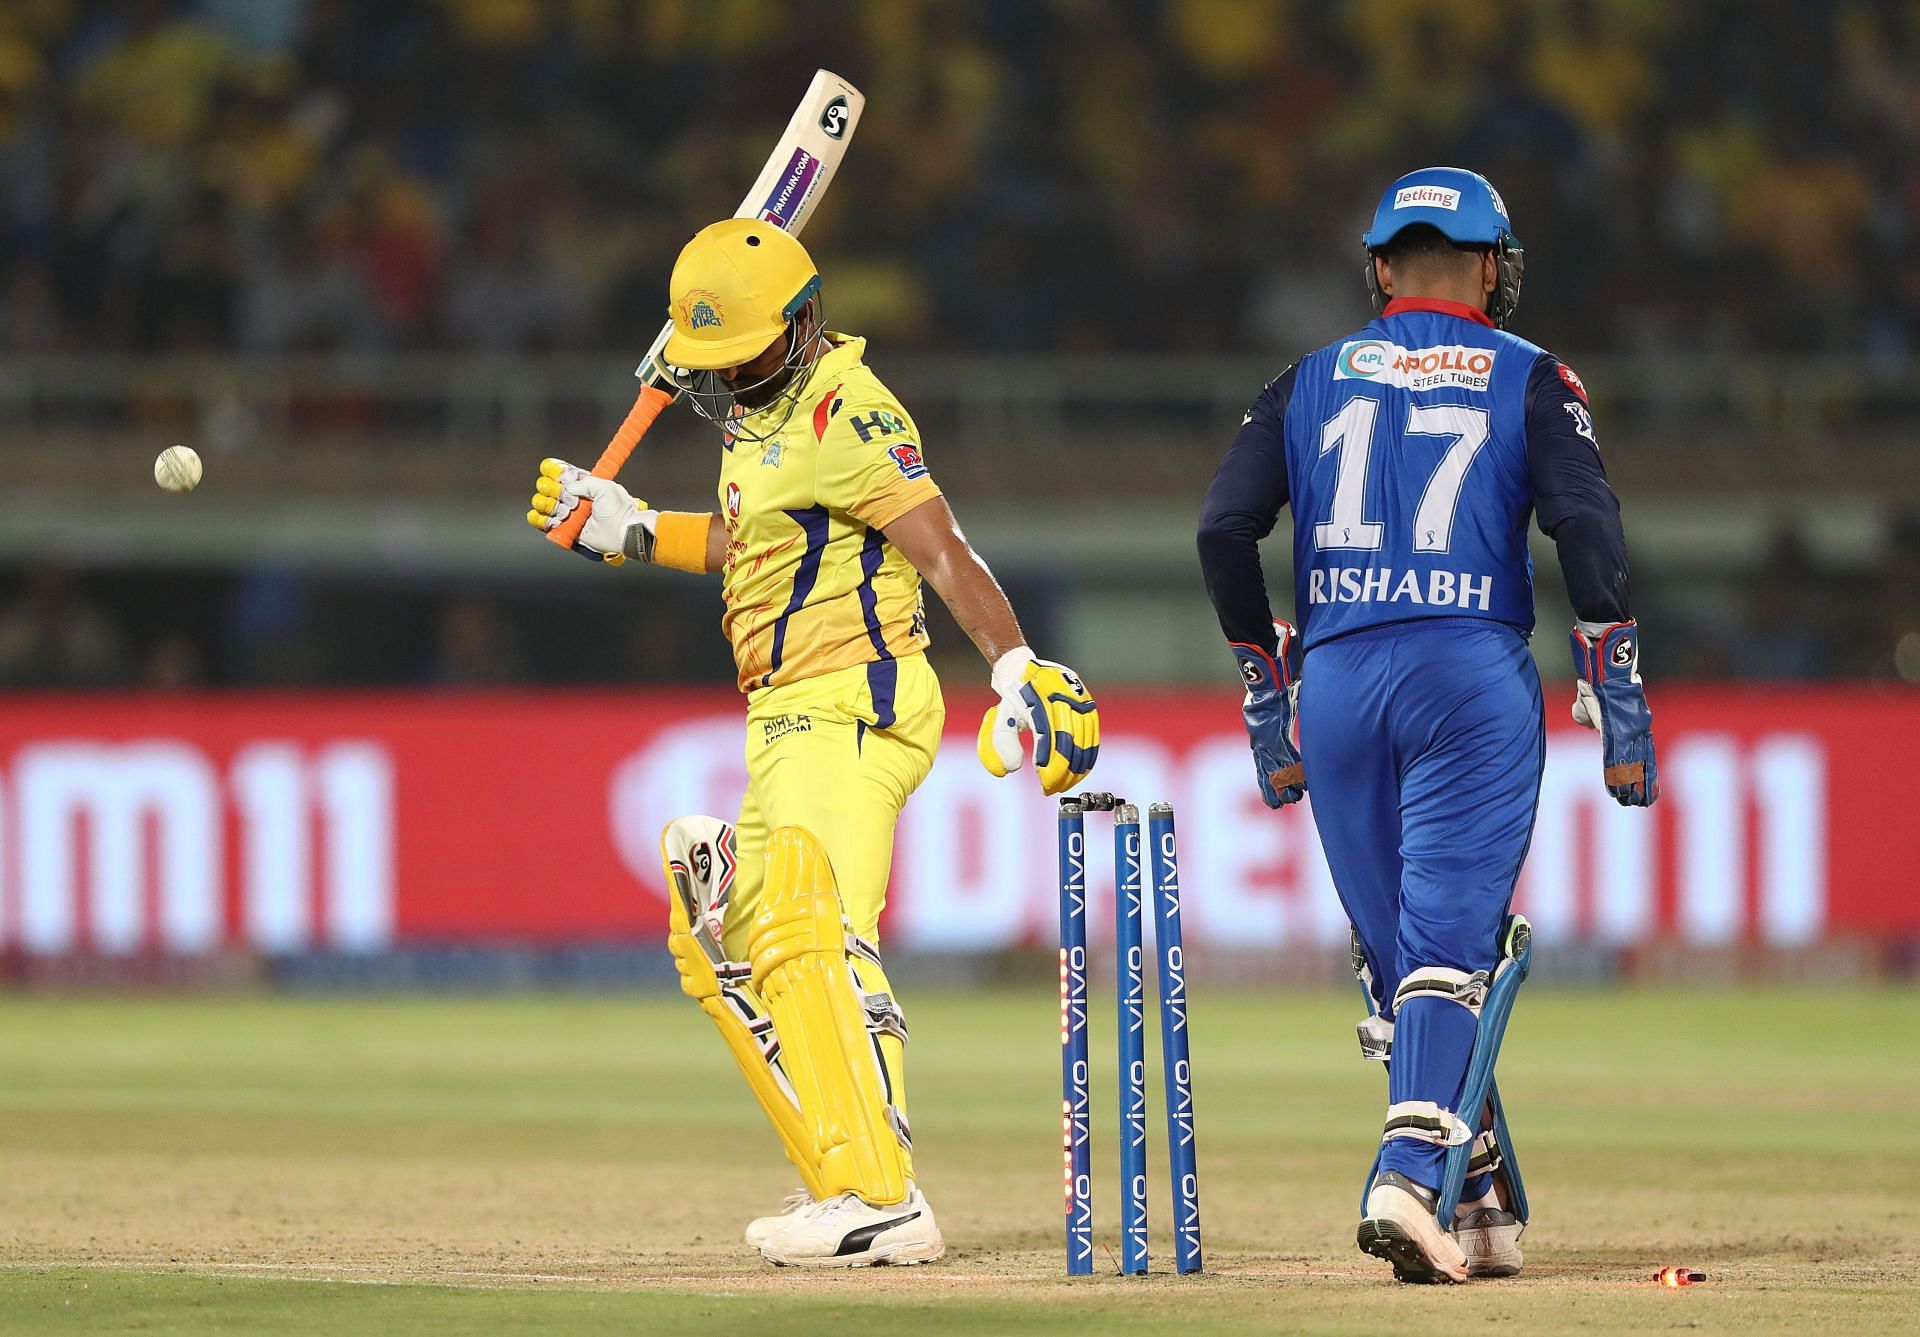 Suresh Raina is the second highest run-getter in DC-CSK matches